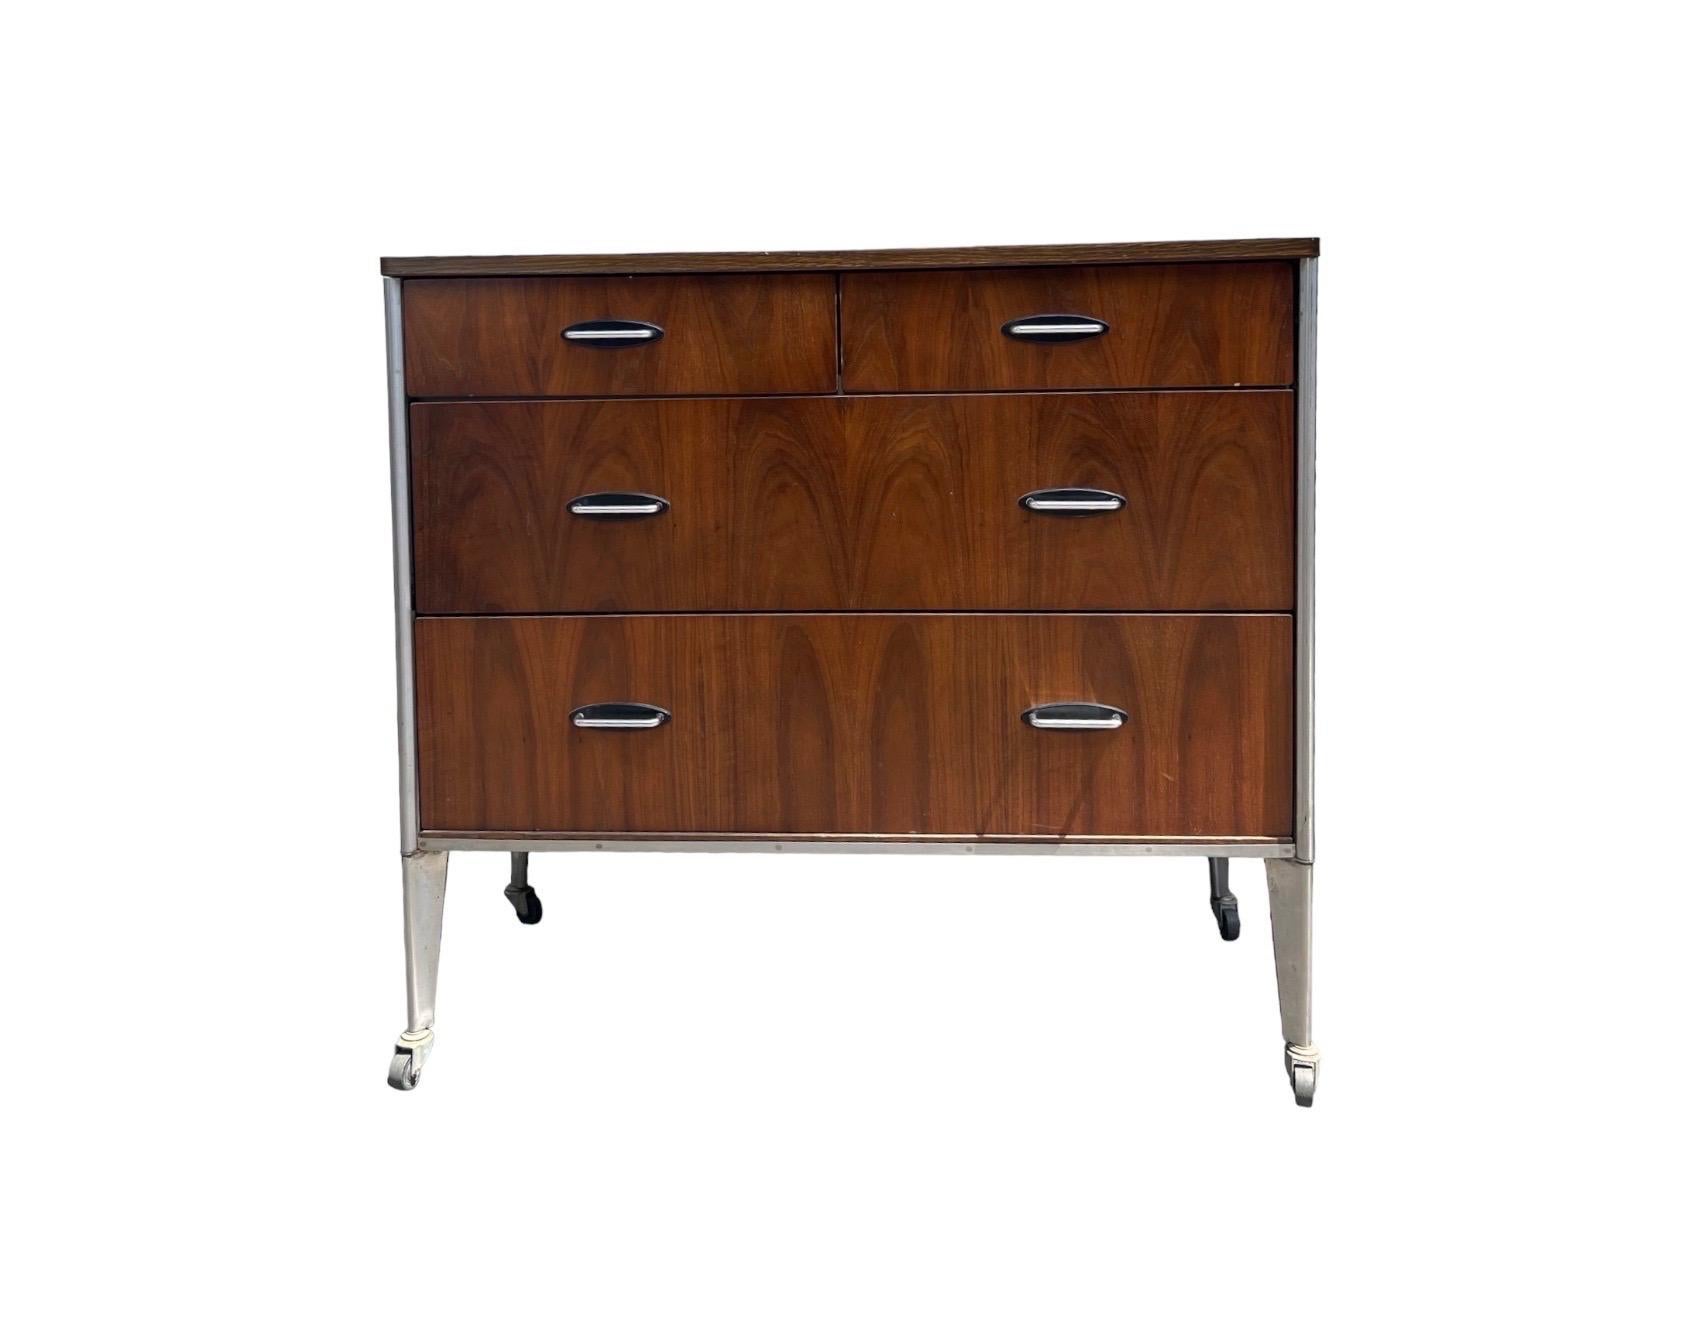 Vintage Mid Century Modern Dresser By Raymond Loewy For Hill Rom , Walnut With Casters

Dimensions. 39 1/2 W ; 17 1/2 D ; 36 H
     Mirror. 62 H